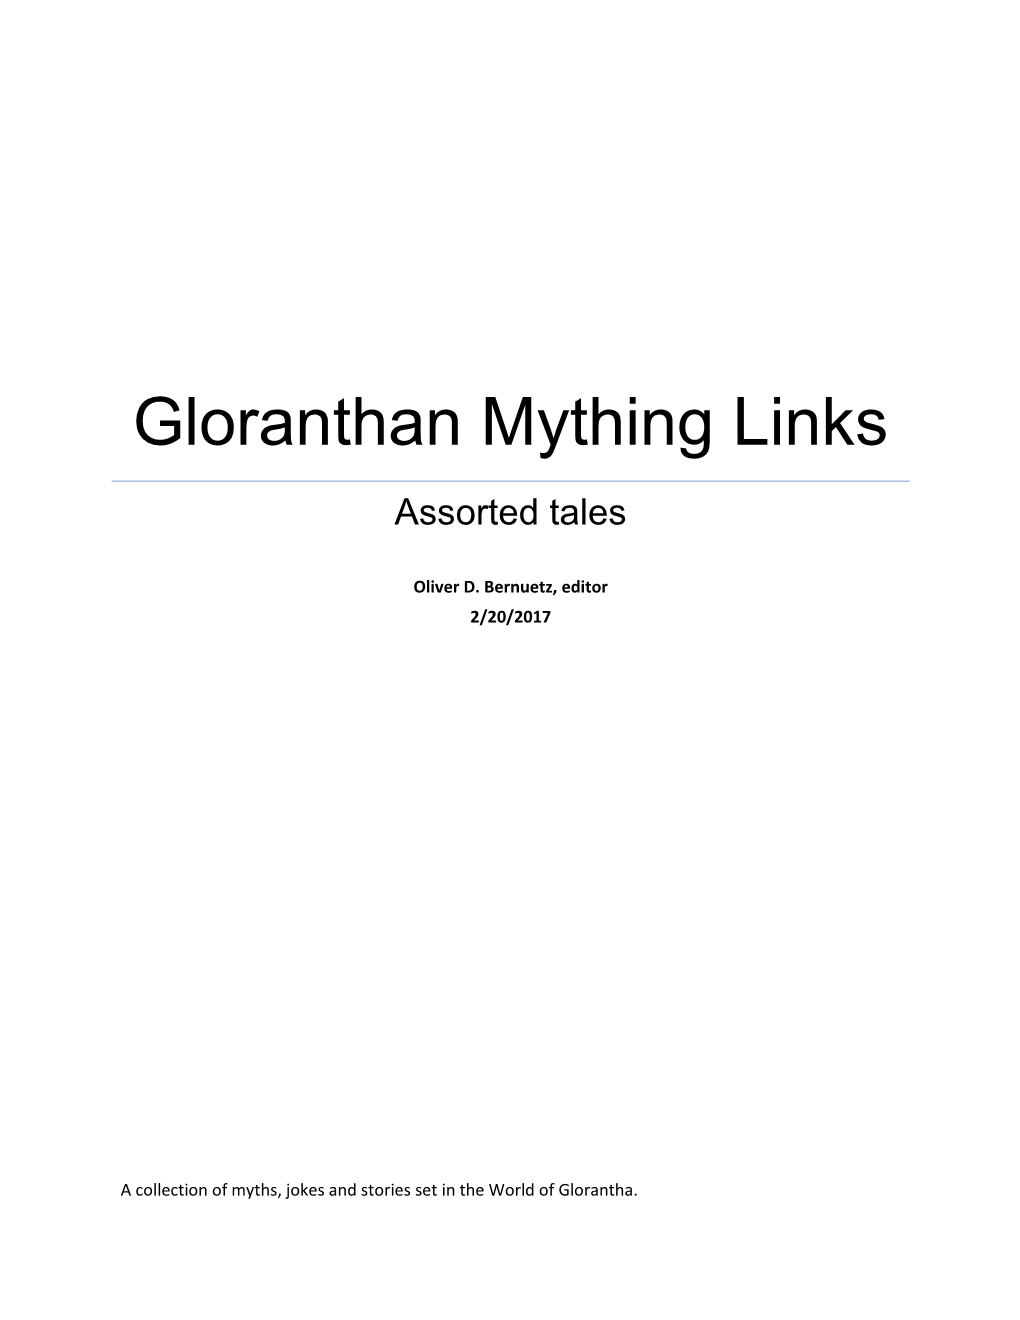 Gloranthan Mything Links Assorted Tales